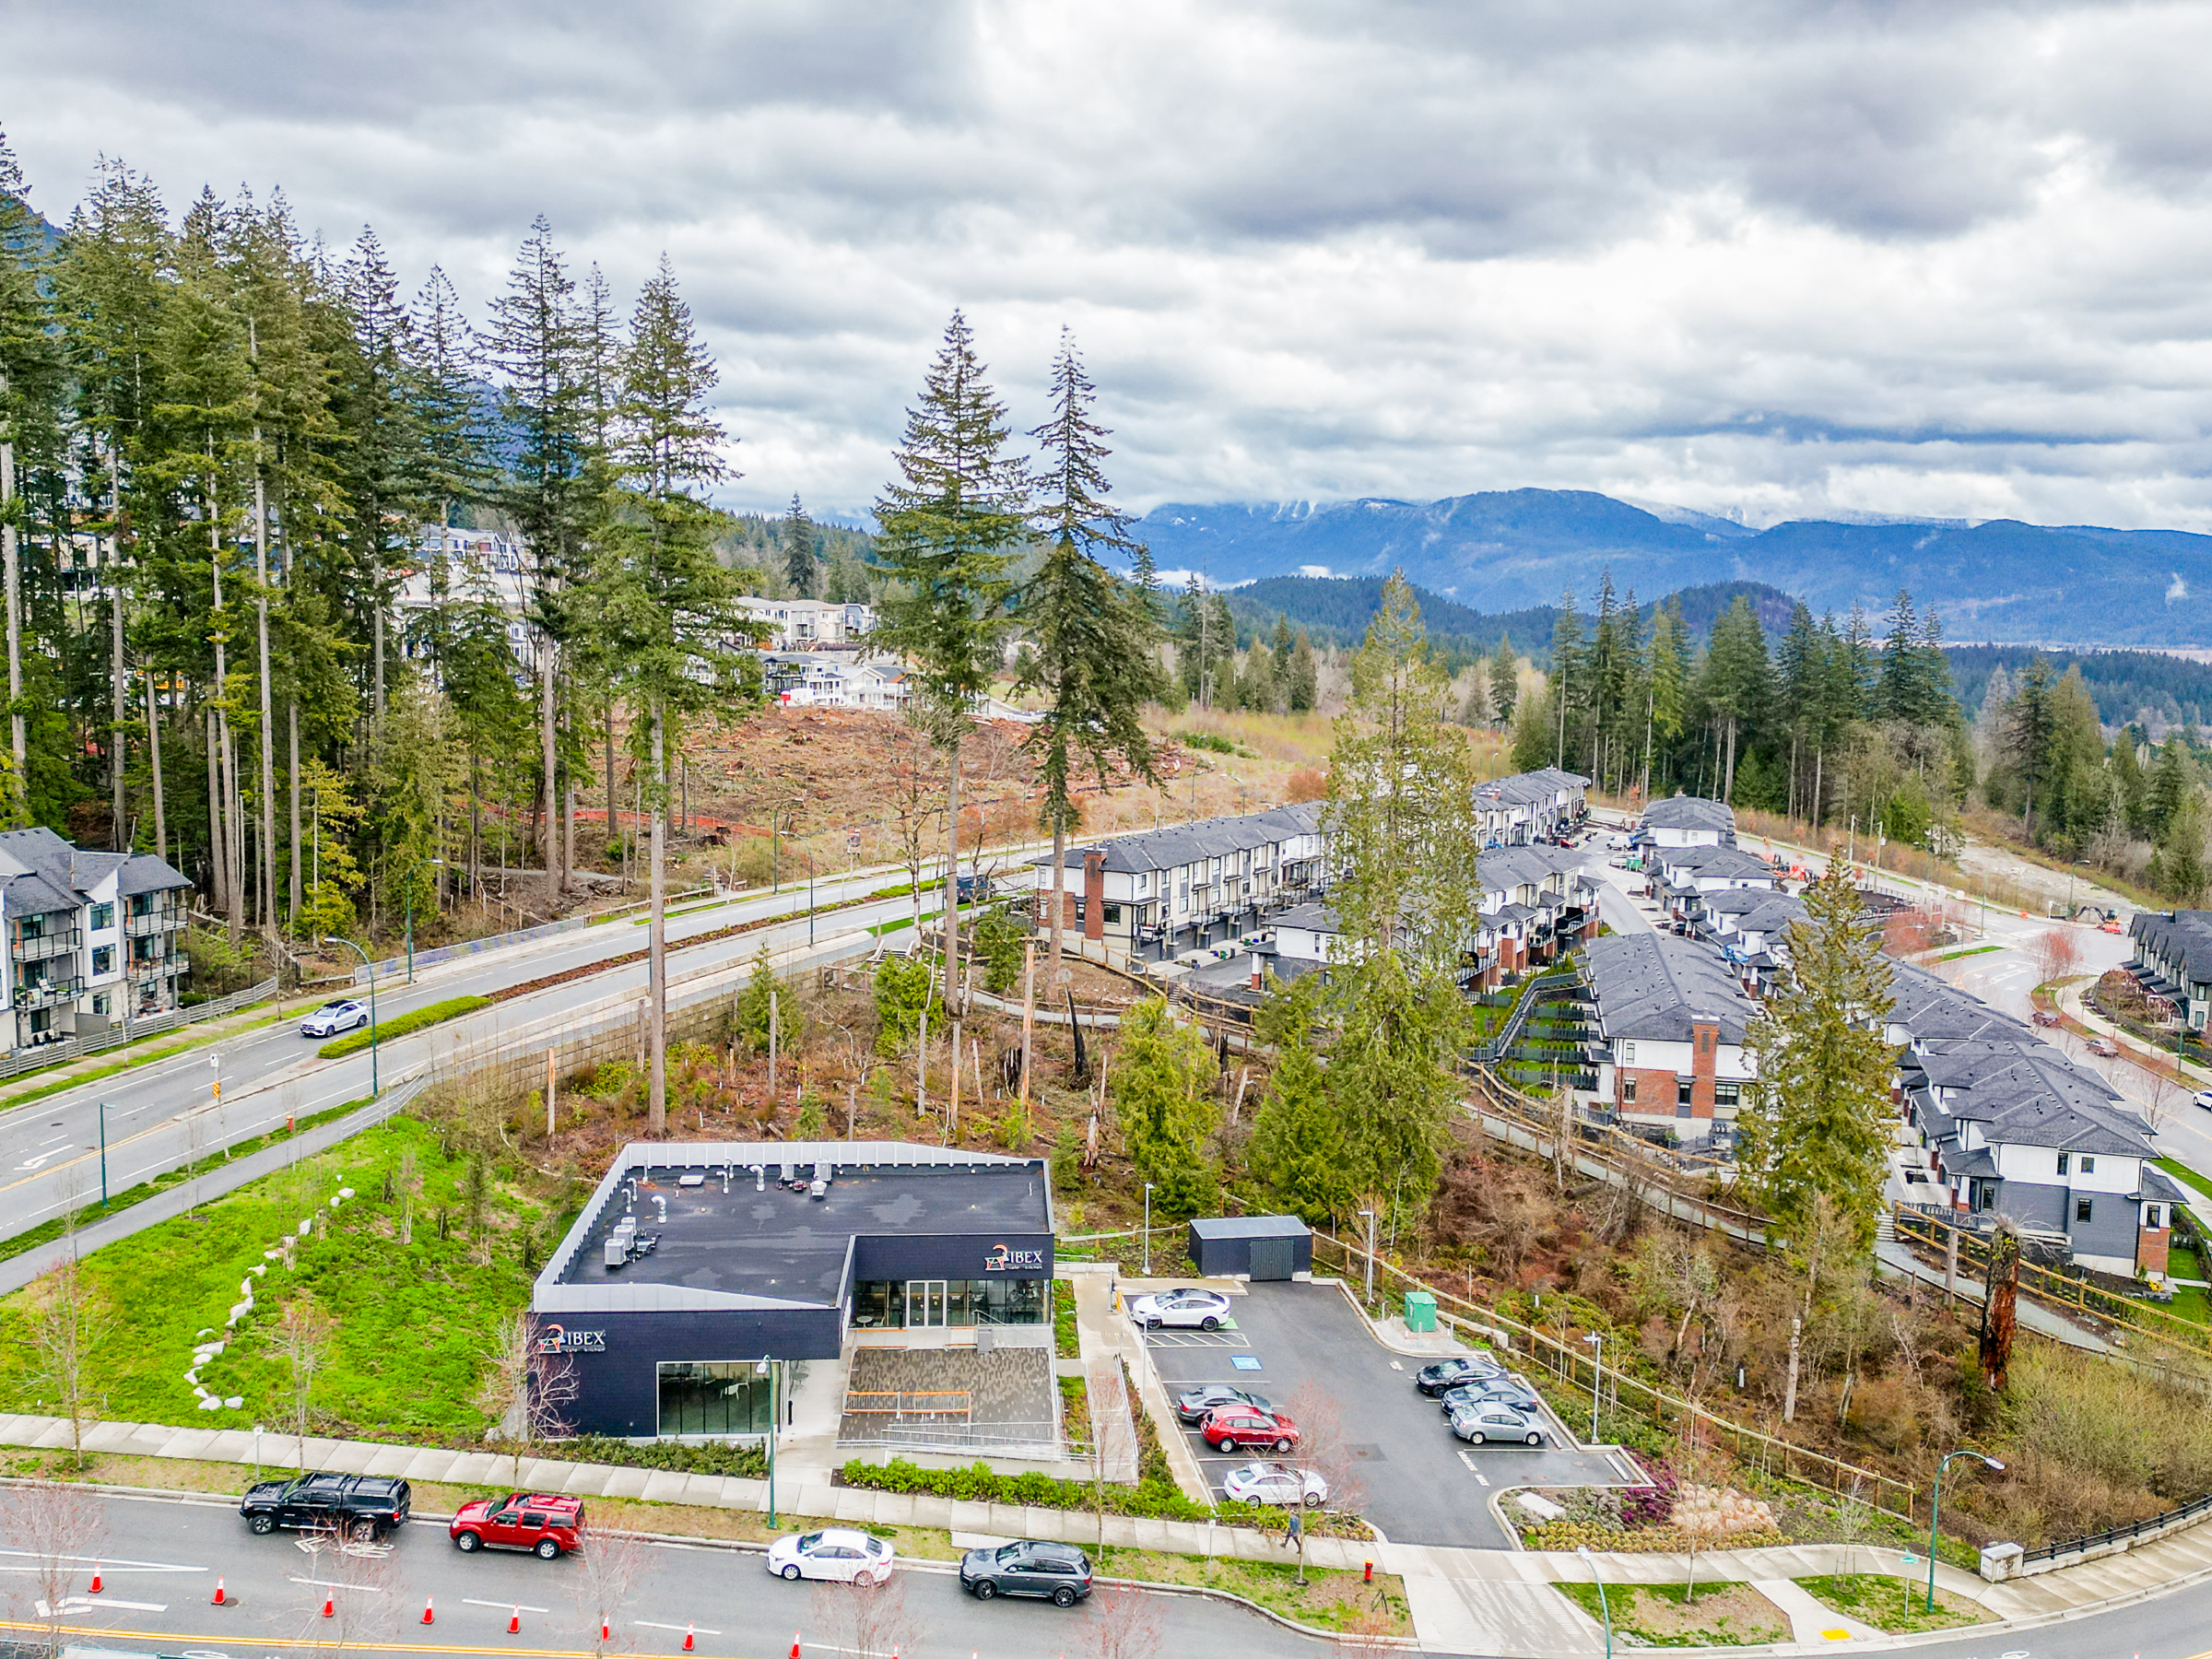 Krista Lapp Burke Mountain Real Estate Unit 48 1320 Riley by Mosaic Street Coquitlam Drone